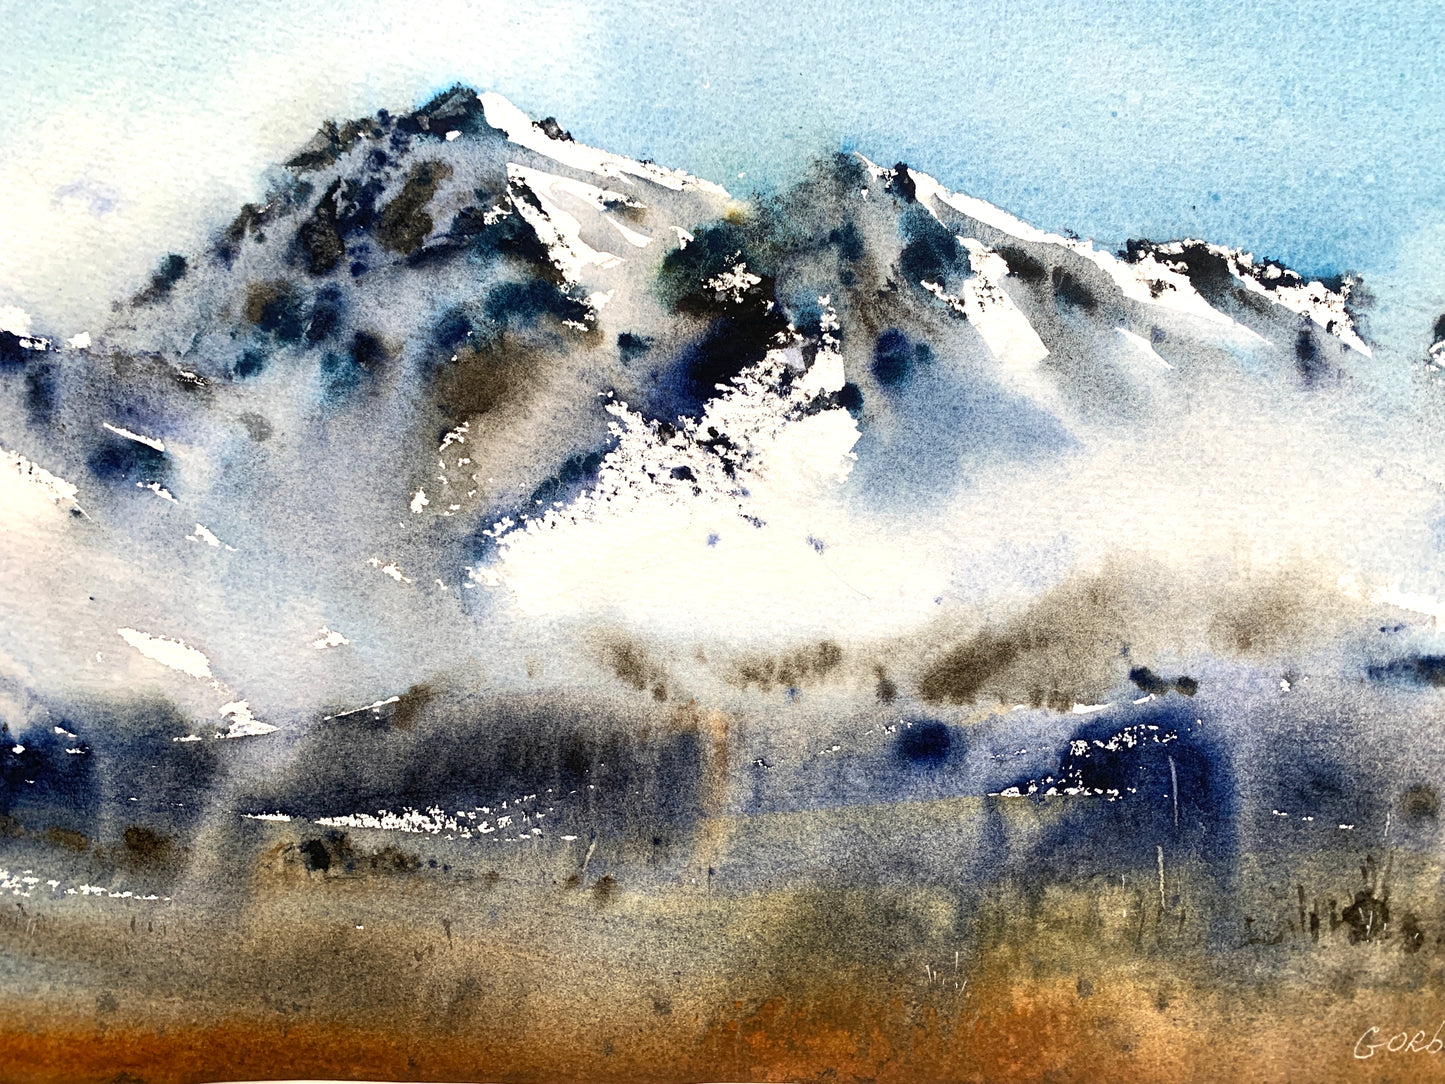 Snowy Mountains Painting Watercolor Original - Mountainscape #2 - 10 x 22 in